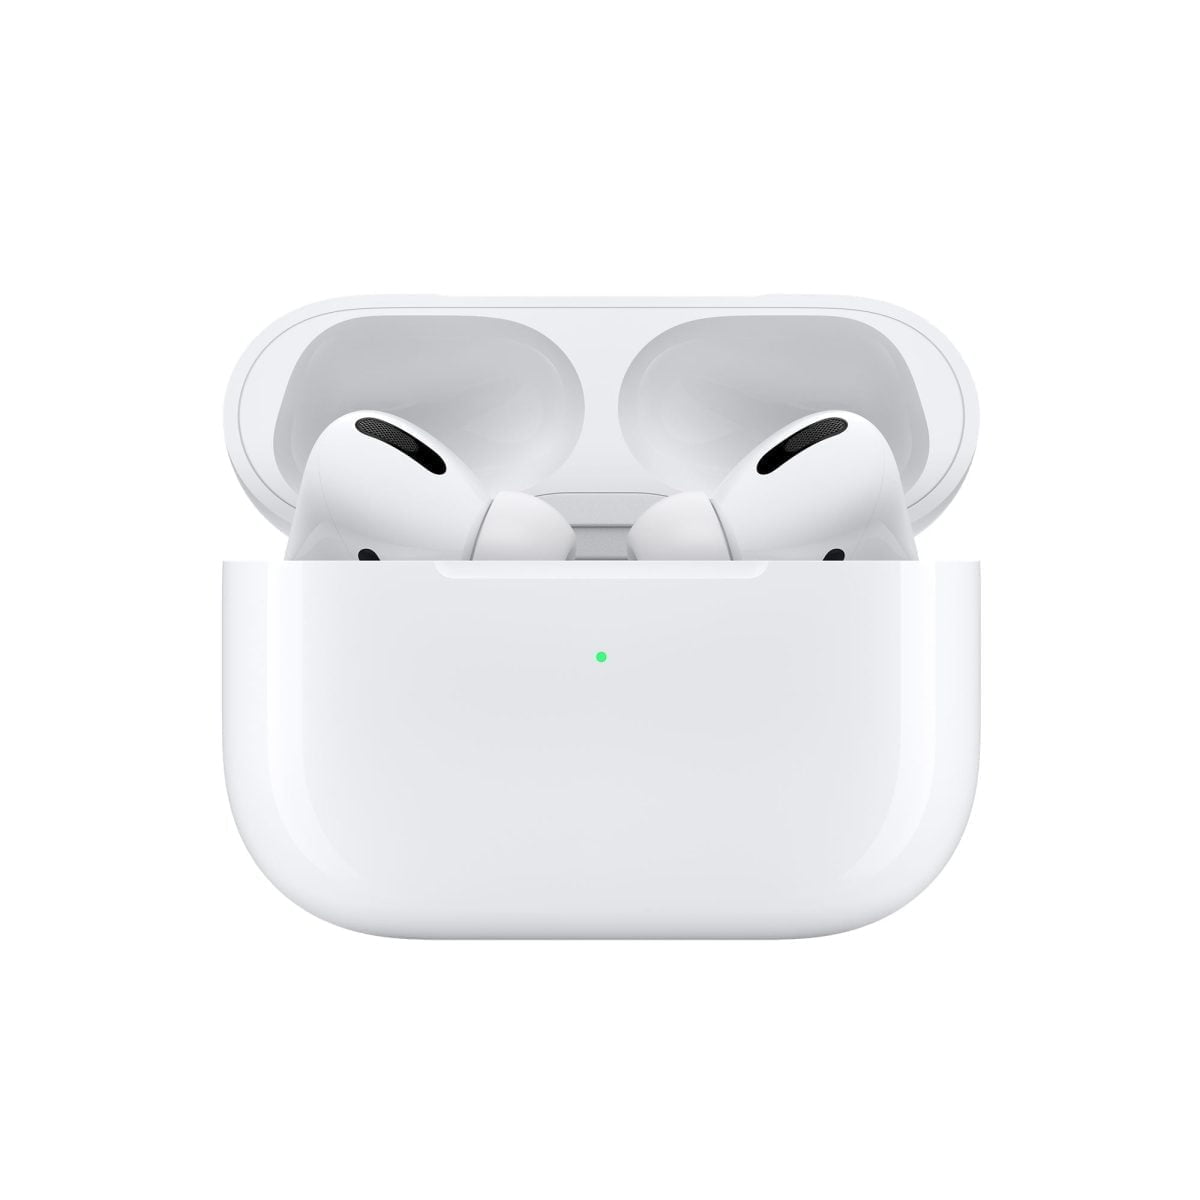 Mwp22 Av2 Apple &Lt;Div Class=&Quot;Rc-Pdsection-Sidepanel Column Large-3 Small-12&Quot;&Gt; &Lt;H1&Gt;Apple Airpods Pro (2Nd Generation) - White Mqd83&Lt;/H1&Gt; &Lt;/Div&Gt; &Lt;Div Class=&Quot;Rc-Pdsection-Mainpanel Column Large-9 Small-12&Quot;&Gt; &Lt;P Class=&Quot;H4-Para-Title&Quot;&Gt;Airpods Pro Feature Up To 2X More Active Noise Cancellation, Plus Adaptive Transparency, And Personalized Spatial Audio With Dynamic Head Tracking For Immersive Sound.² Now With Multiple Ear Tips (Xs, S, M, L) And Up To 6 Hours Of Listening Time.&Lt;/P&Gt; &Lt;/Div&Gt; Airpods Pro Apple Airpods Pro (2Nd Generation) - White Mqd83